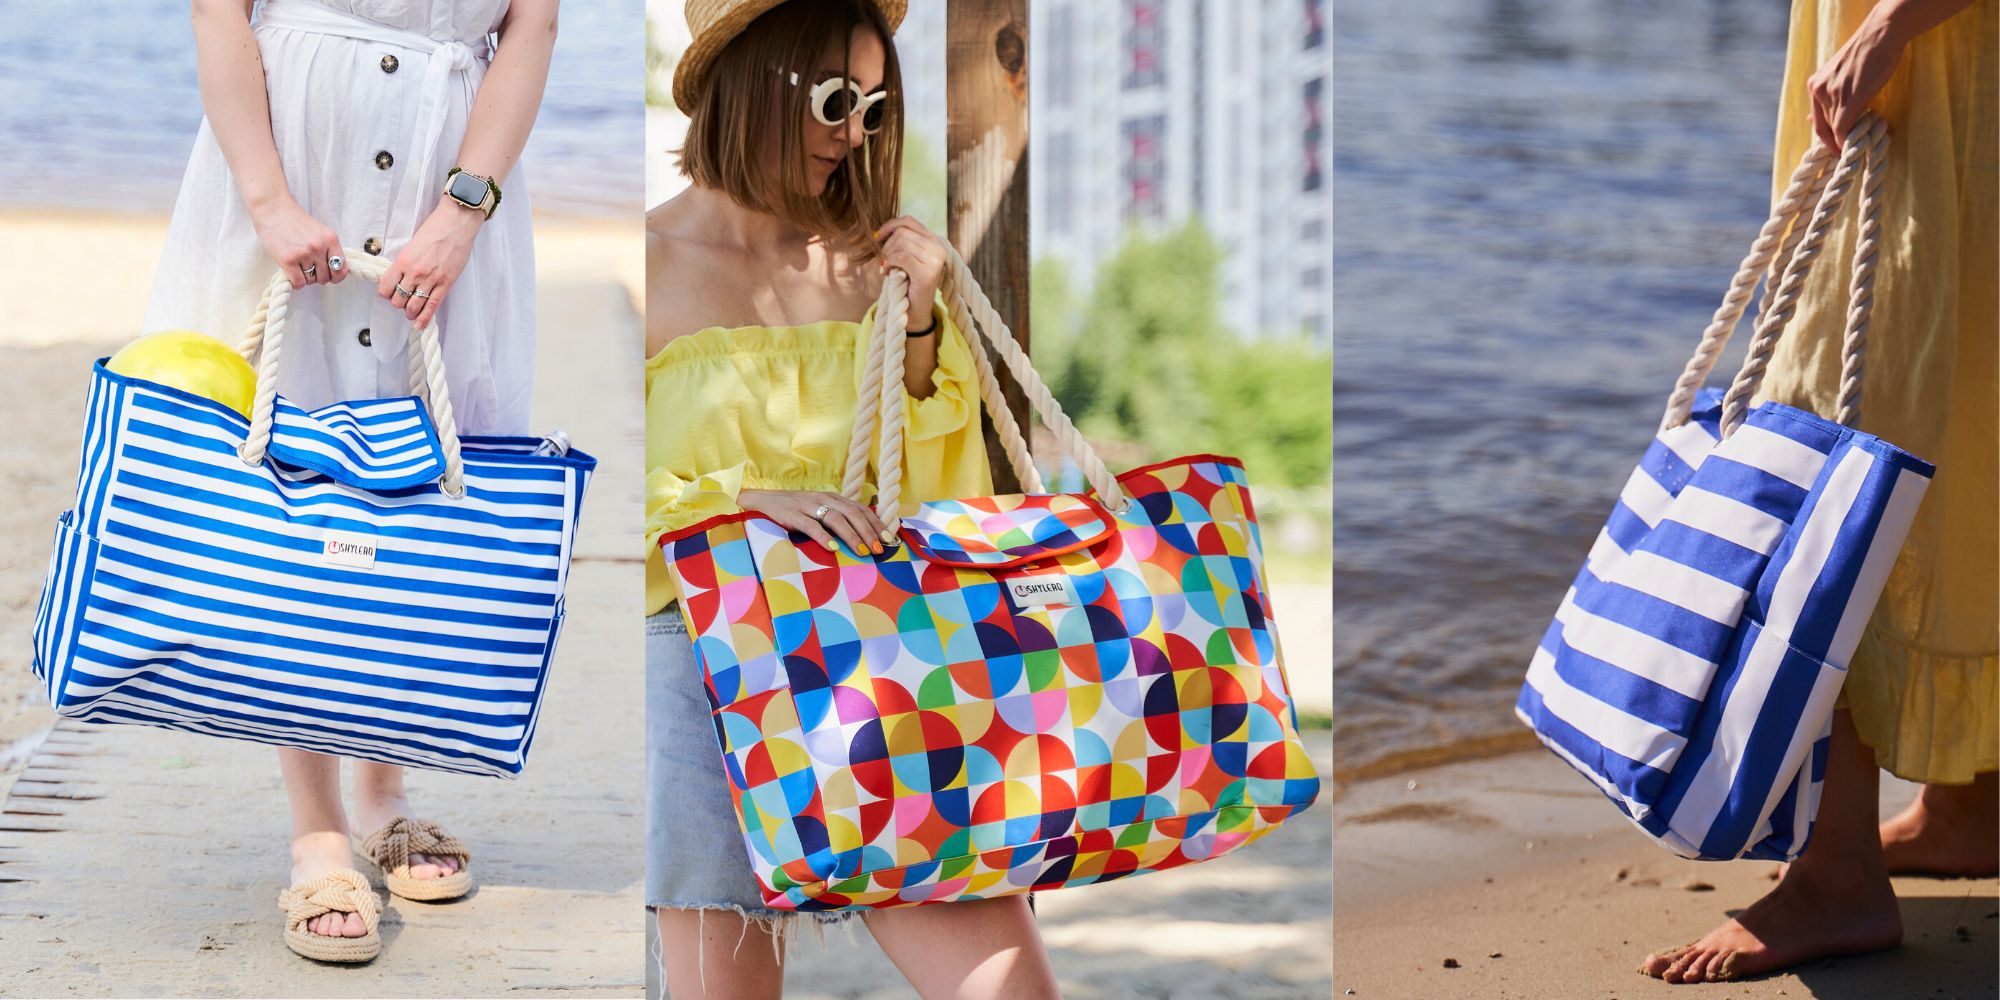 Waterproof Beach Bags and Totes. XL Only